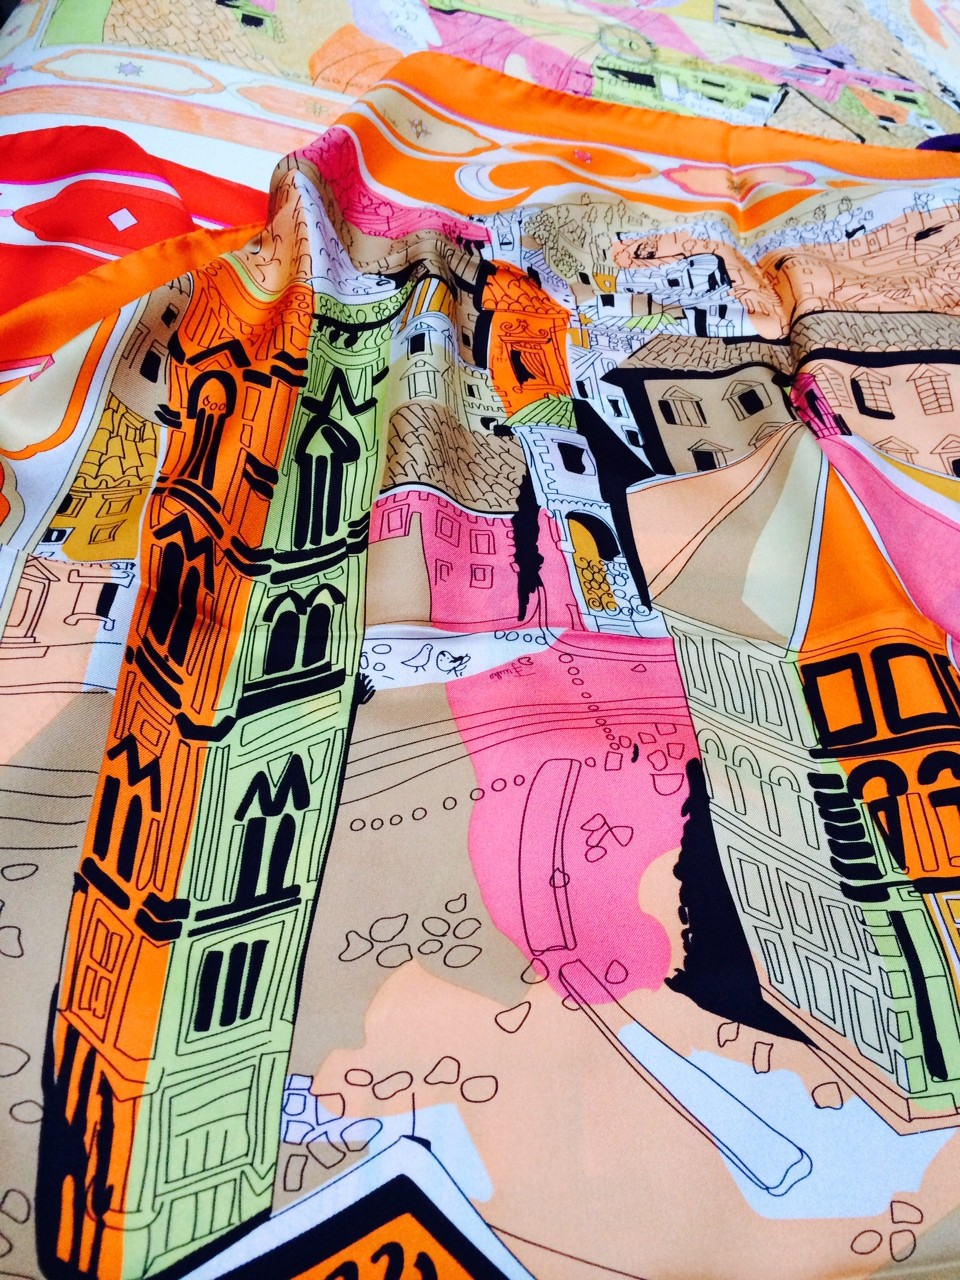 A detail of the scarf designed by Emilio Pucci in 1957 which features a view from above the Piazza San Giovanni interpreted in vibrant lemon yellow, orange, fuchsia and a touch of Emilio pink. (Foto: Suzy Menkes)